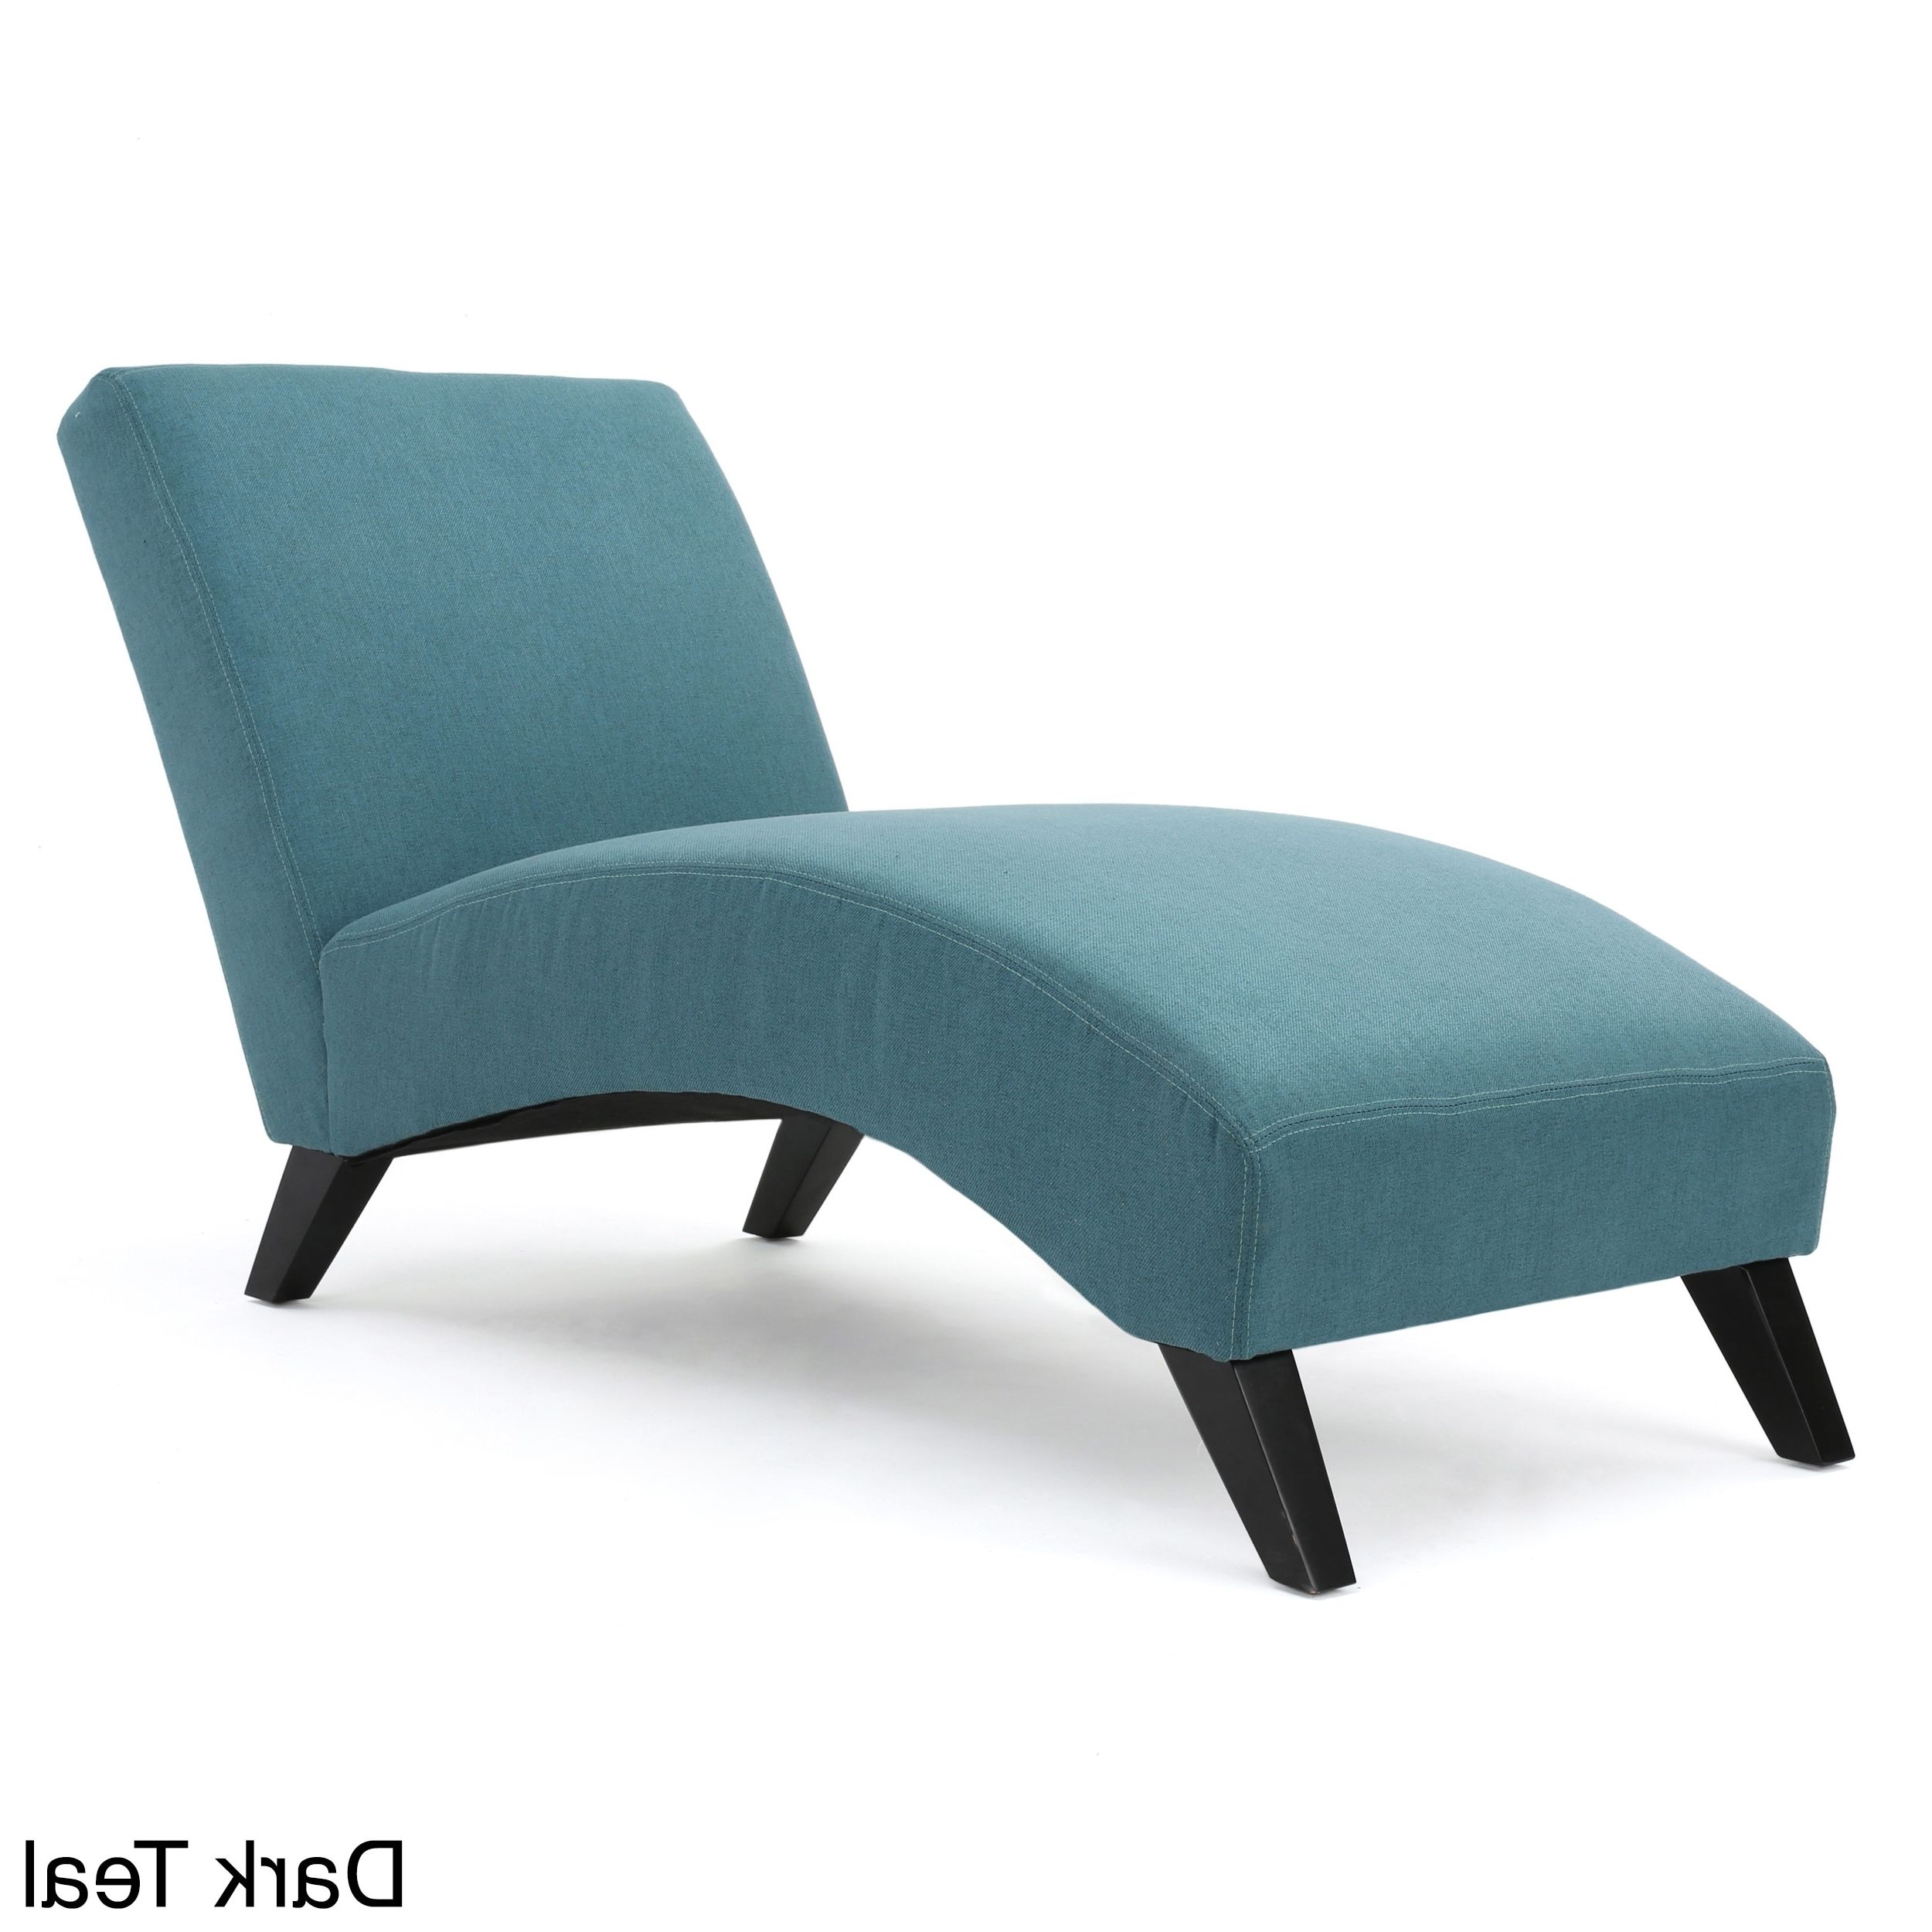 Teal Chaise Lounges Intended For Current Finlay Fabric Chaise Loungechristopher Knight Home – Free (Photo 9 of 15)